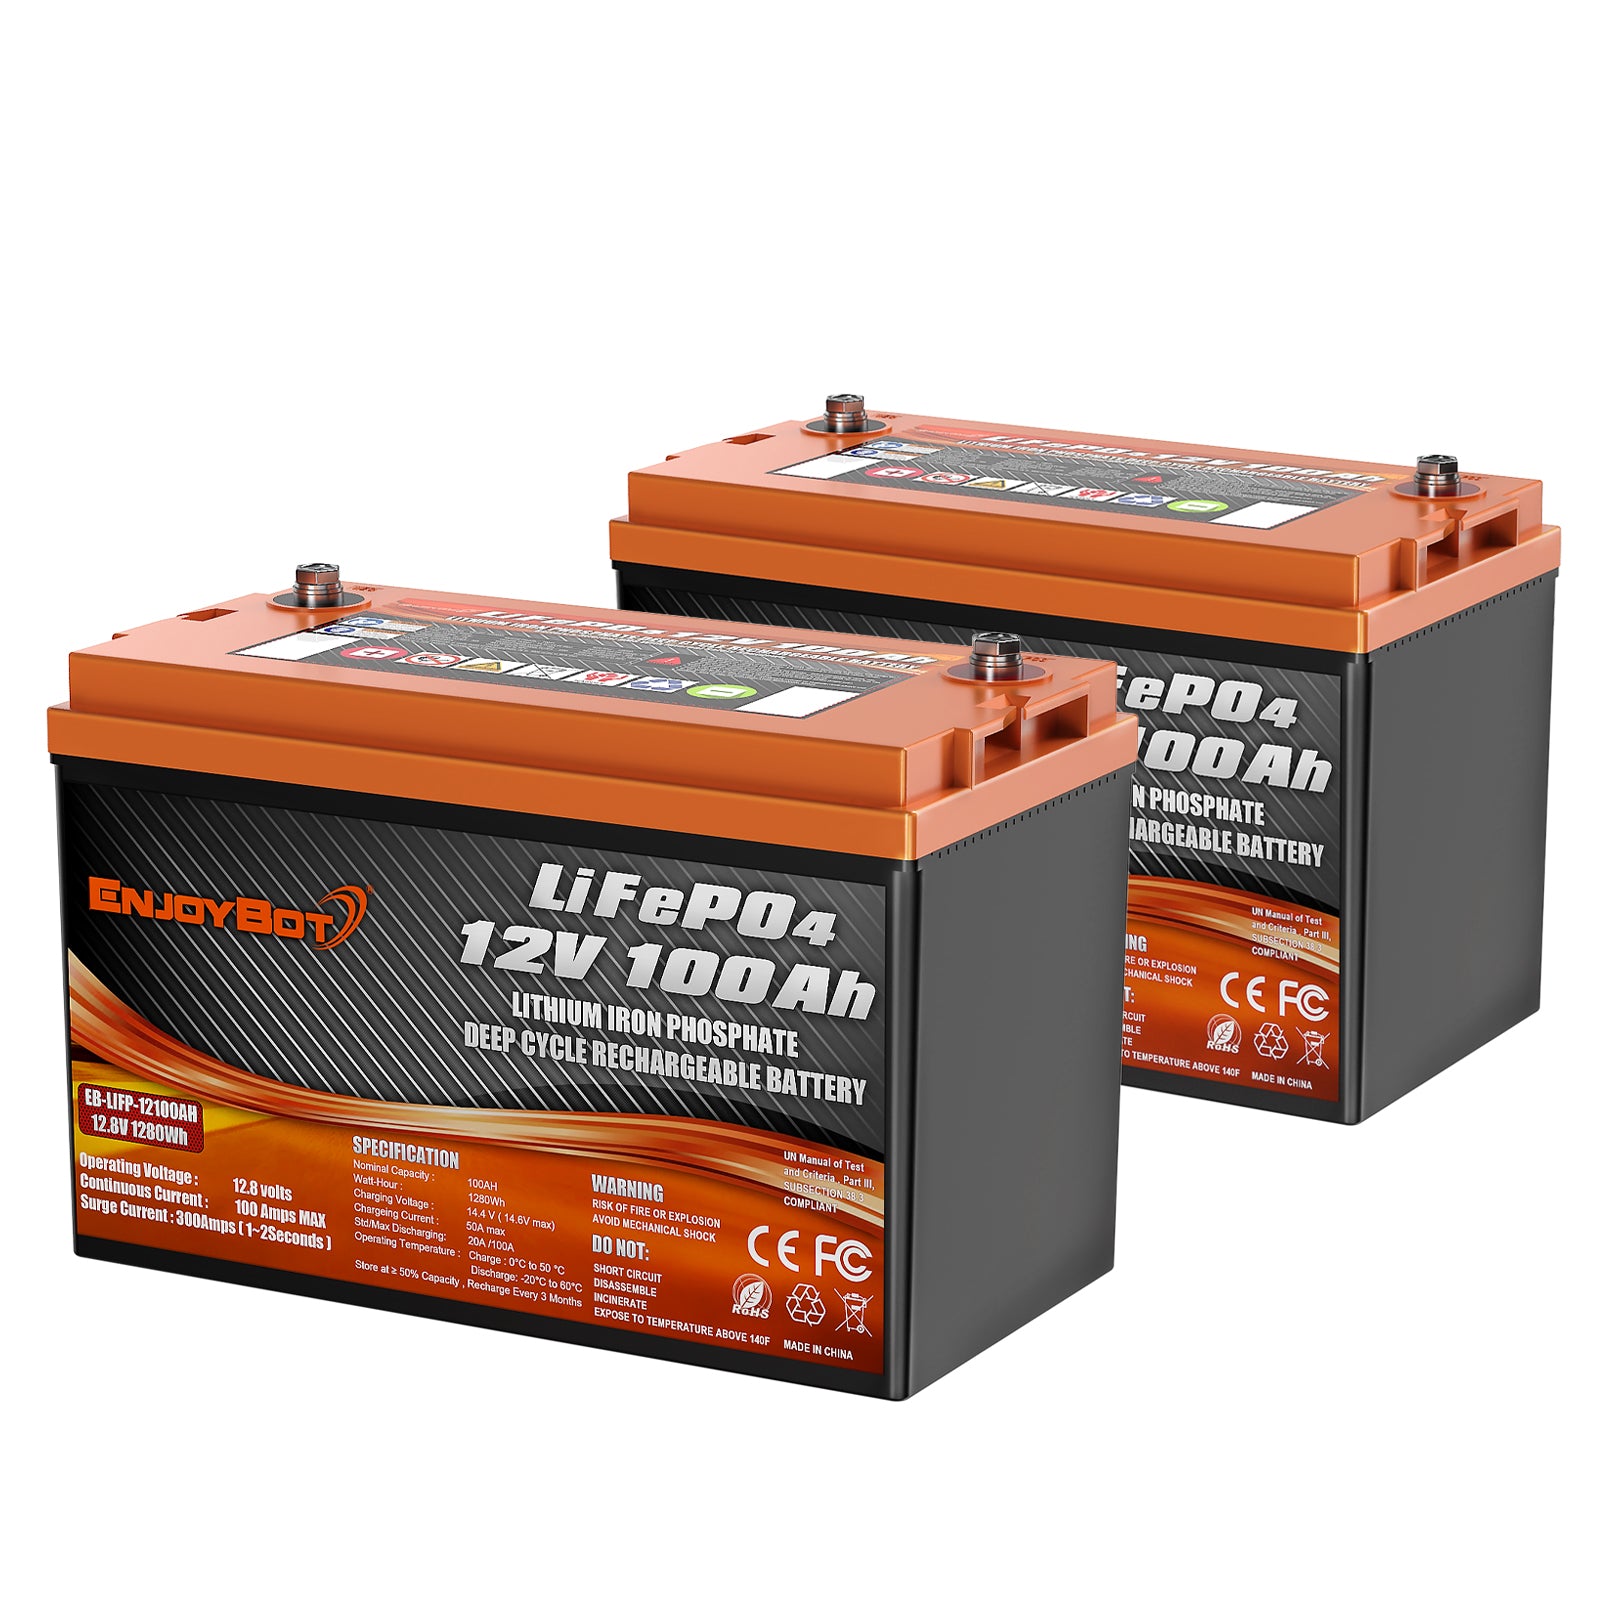 Enjoybot Lithium Battery 24v 100ah High & Low Temp Protection for Marine Trolling Motor Deep Cycle Battery 2560 Wh - 2 batteries